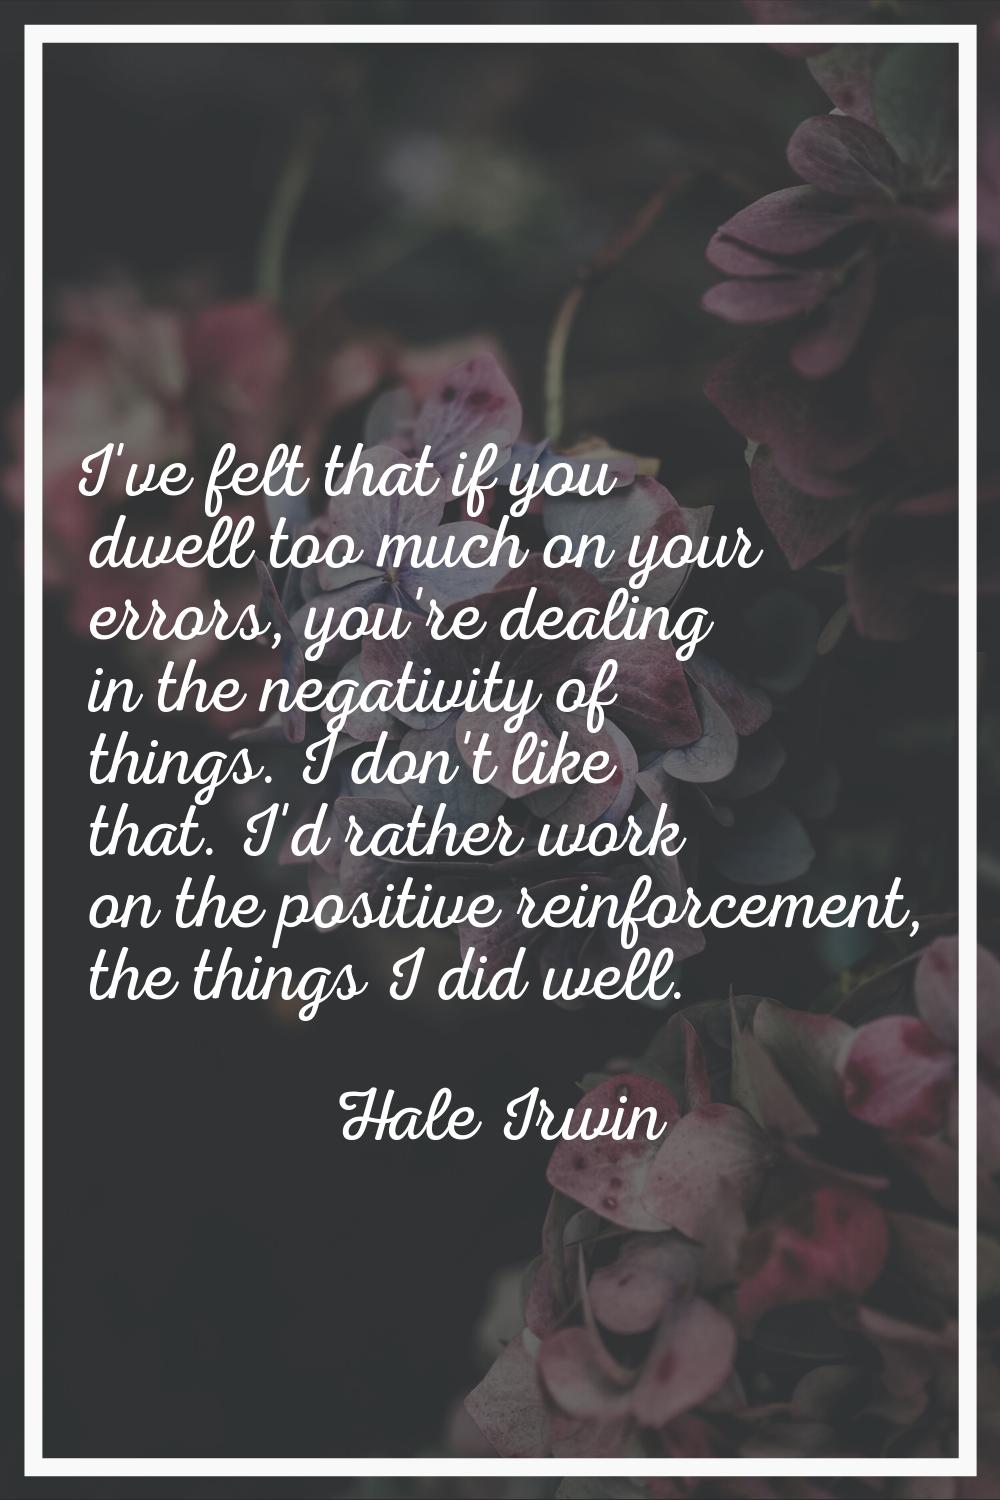 I've felt that if you dwell too much on your errors, you're dealing in the negativity of things. I 